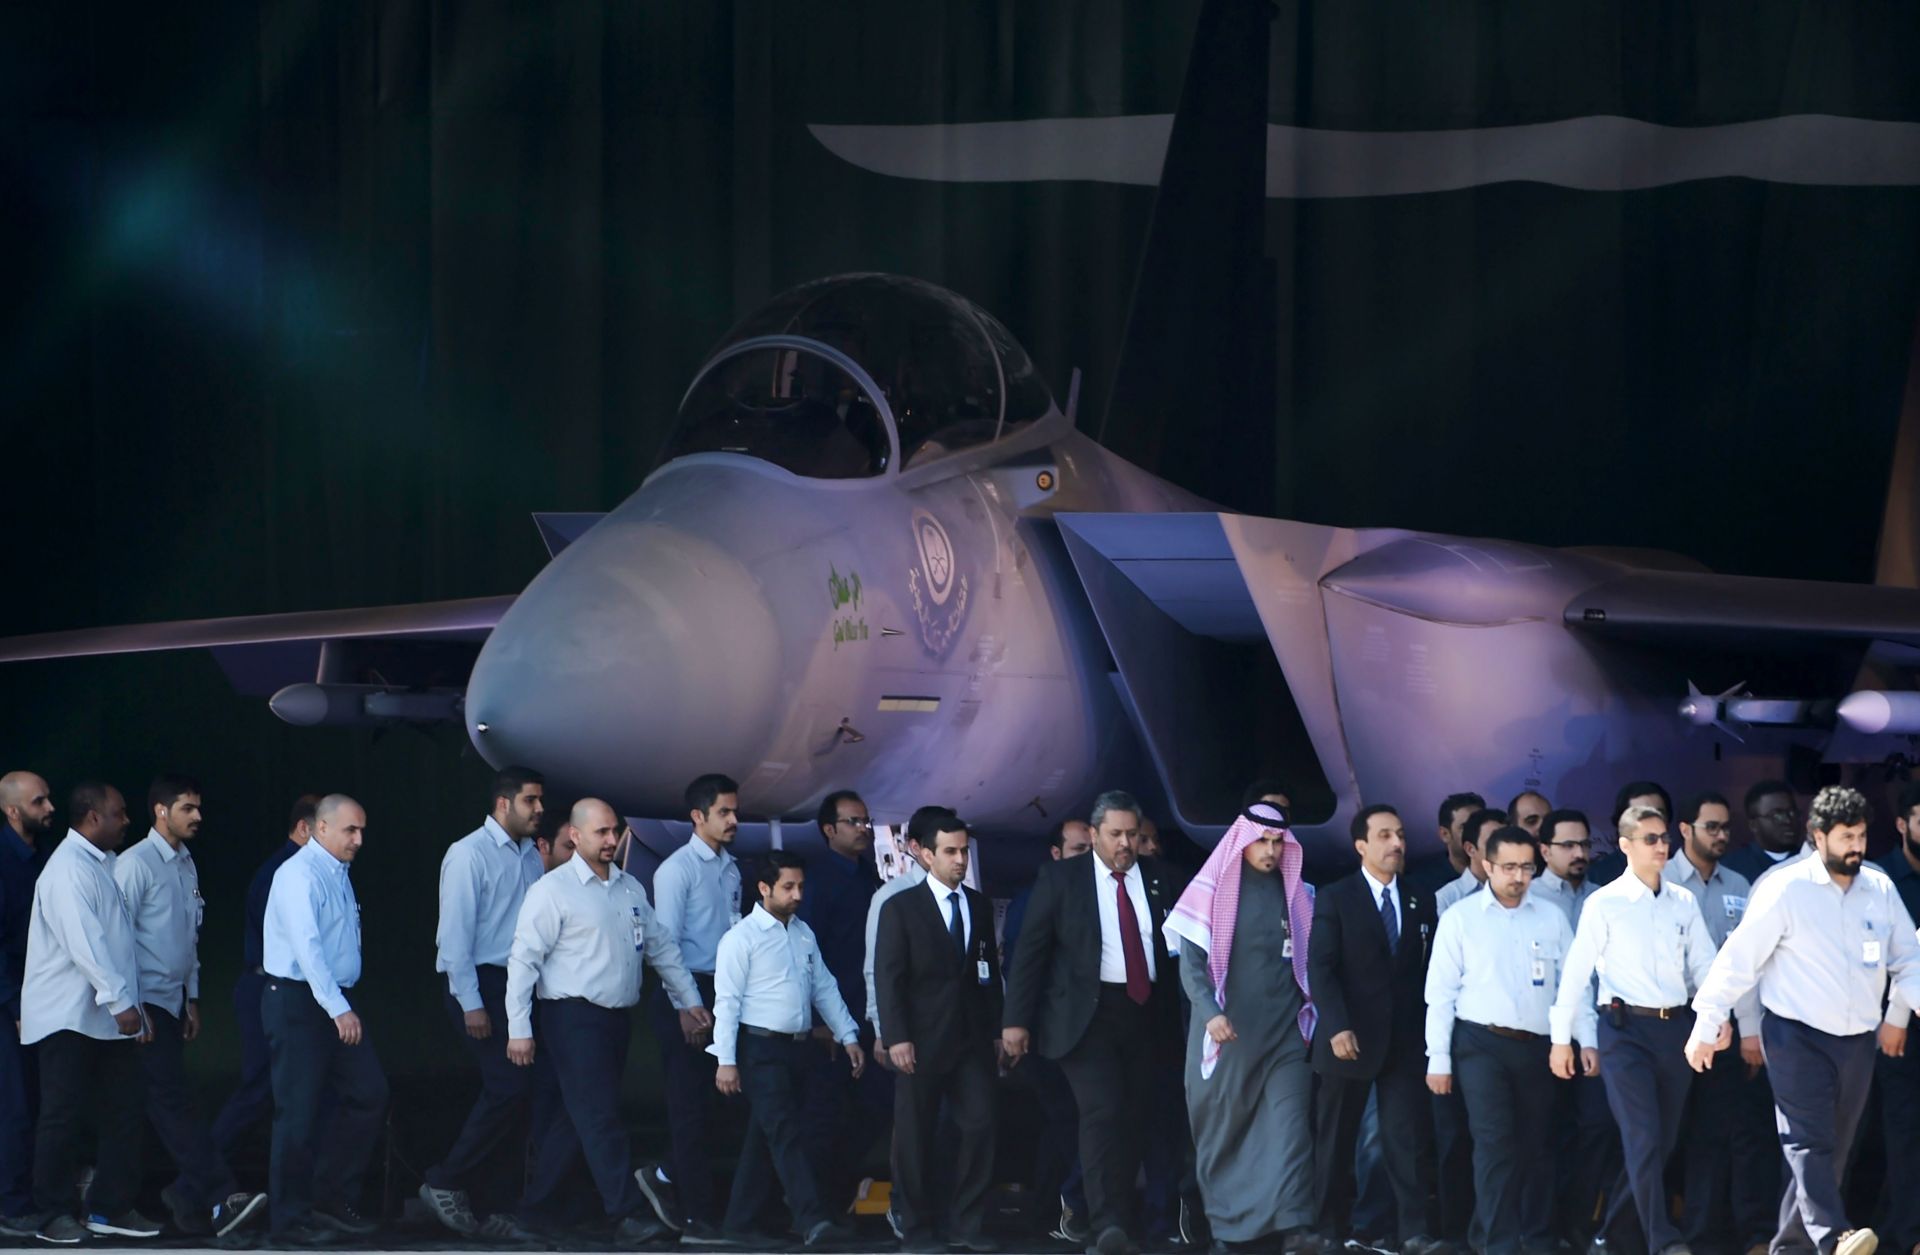 Saudi air force officers and technical staff walk past an advanced F-15SA fighter jet during a ceremony on Jan. 25, 2017 in Riyadh marking the 50th anniversary of the creation of the King Faisal Air Academy.